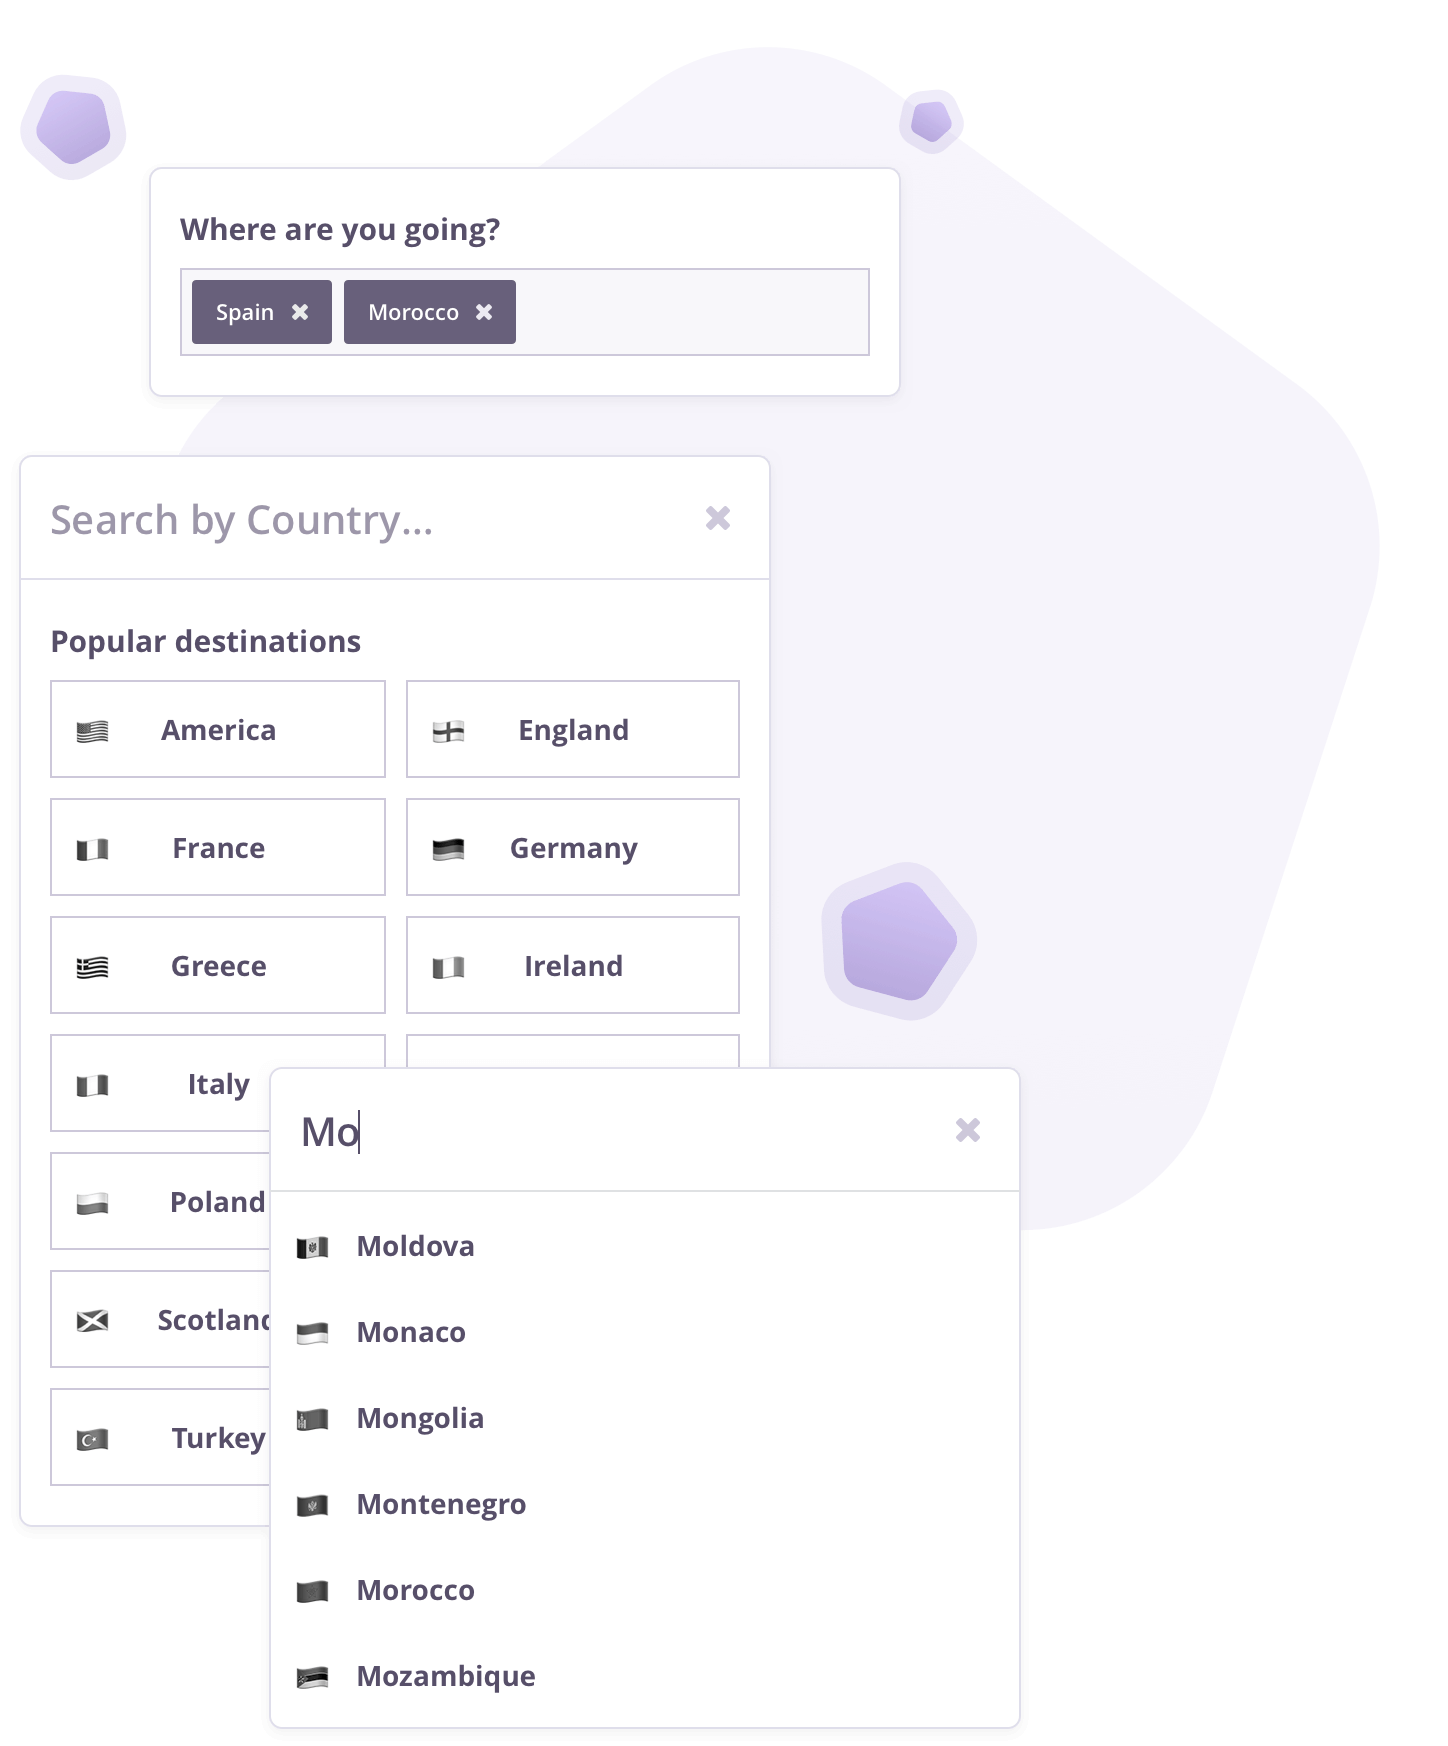 Suggested destinations based on the most popular choices of 4/5 customers. There is also an autocomplete search field to help customers find their destination.